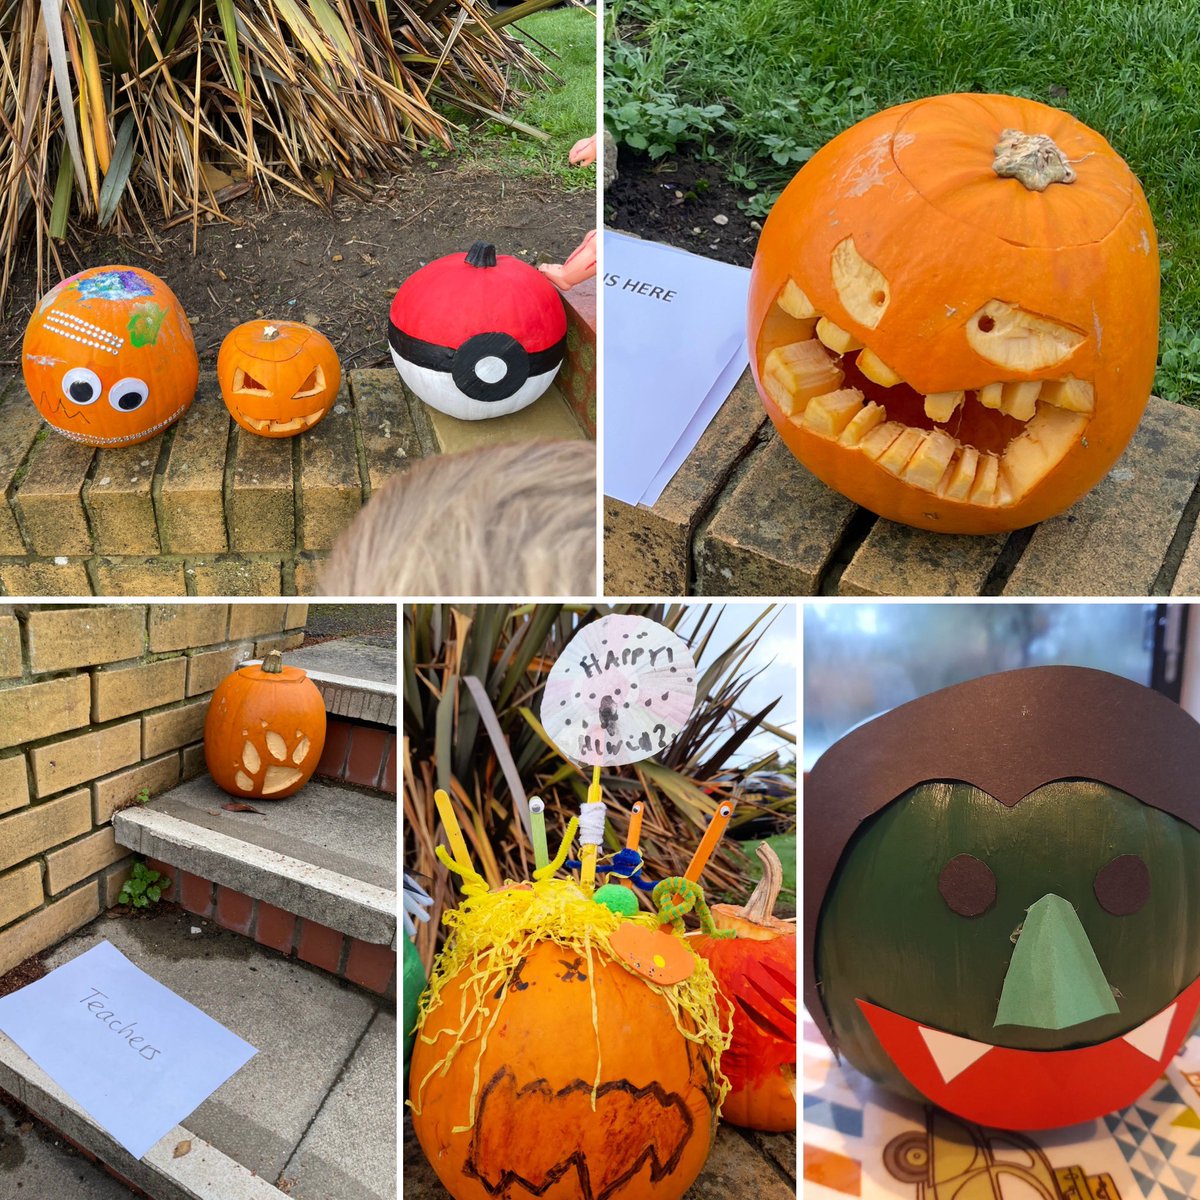 Thank you for taking part in the @FOICs @IvyChimneys pumpkin festival. It was amazing to see the creative designs! We have organised some small prizes for the best in each phase… These will be given out in assembly on Friday. Thank you everyone. 😃